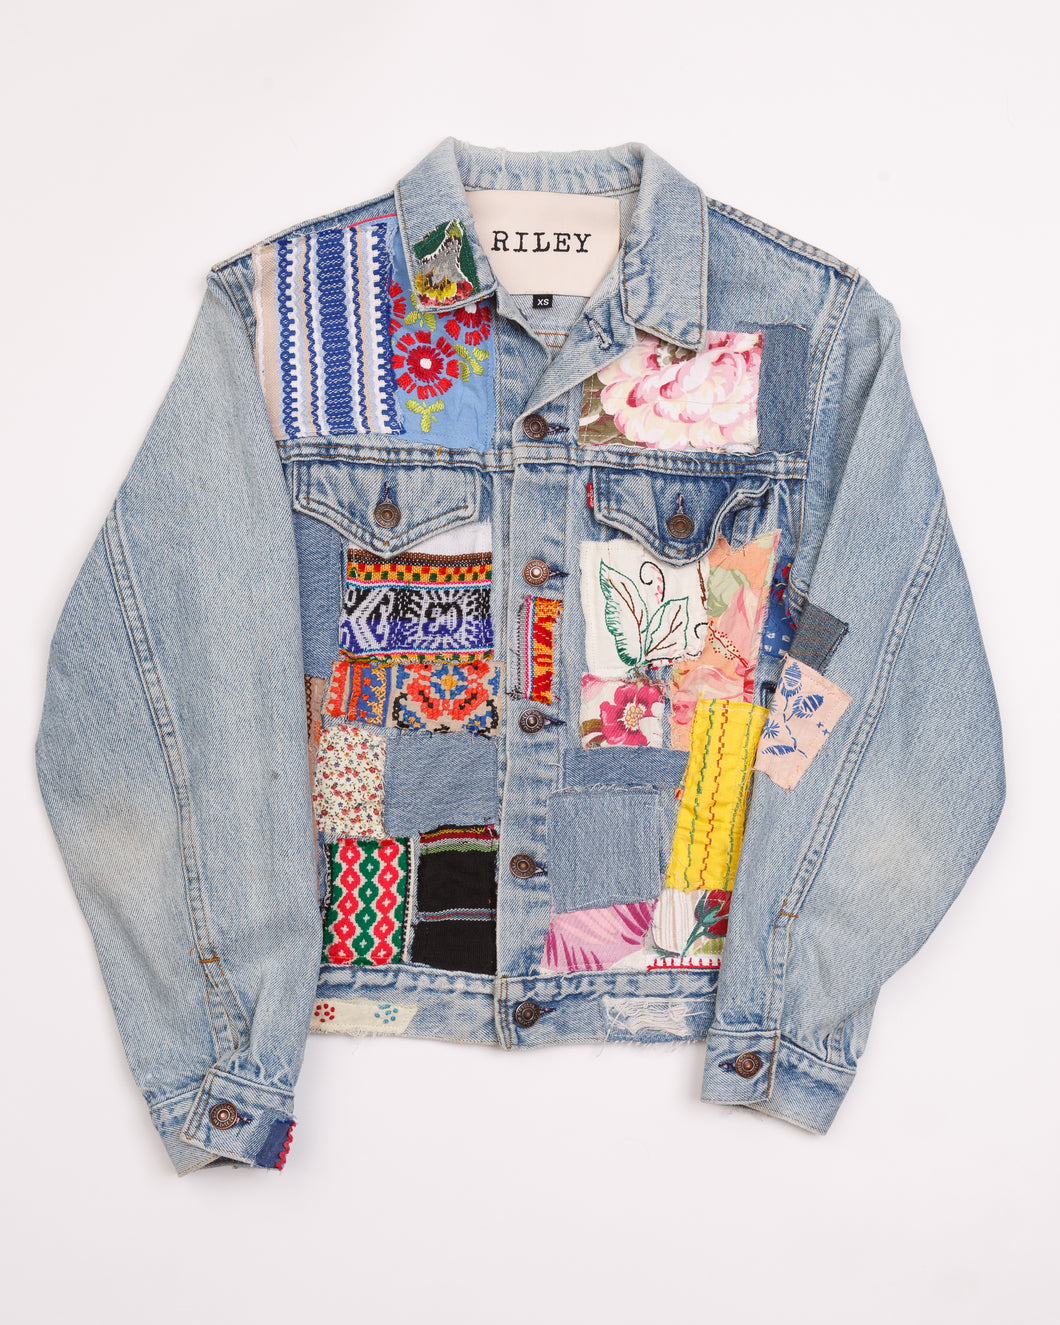 RILEY VINTAGE Totally Patched Up Trucker Jacket ships within 2 weeks